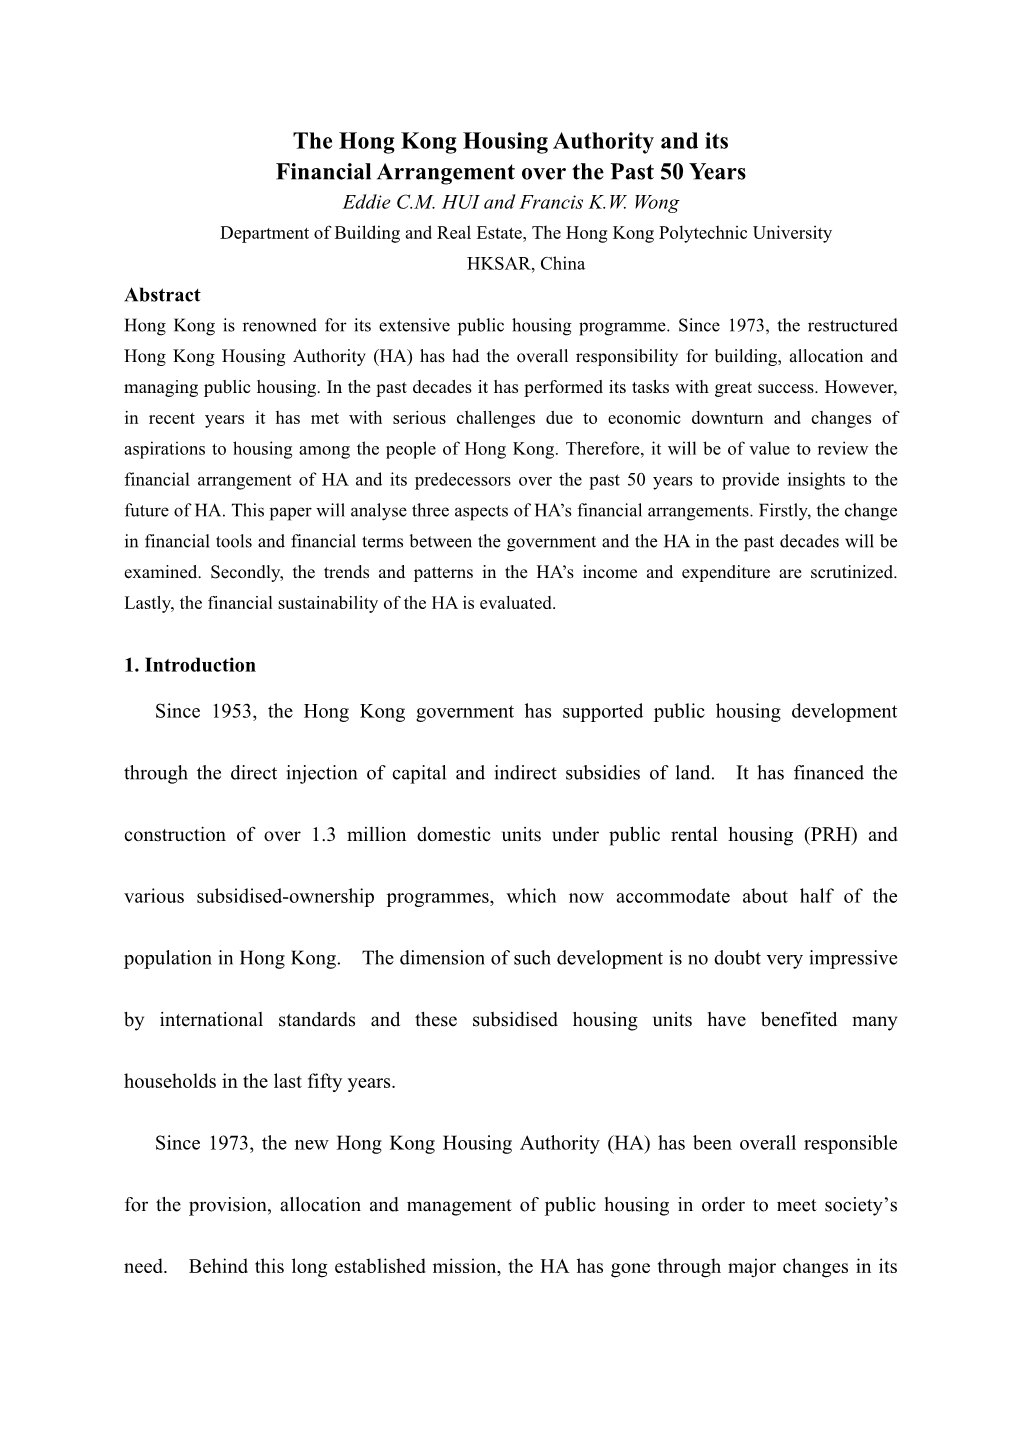 The Hong Kong Housing Authority and Its Financial Arrangement Over the Past 50 Years Eddie C.M